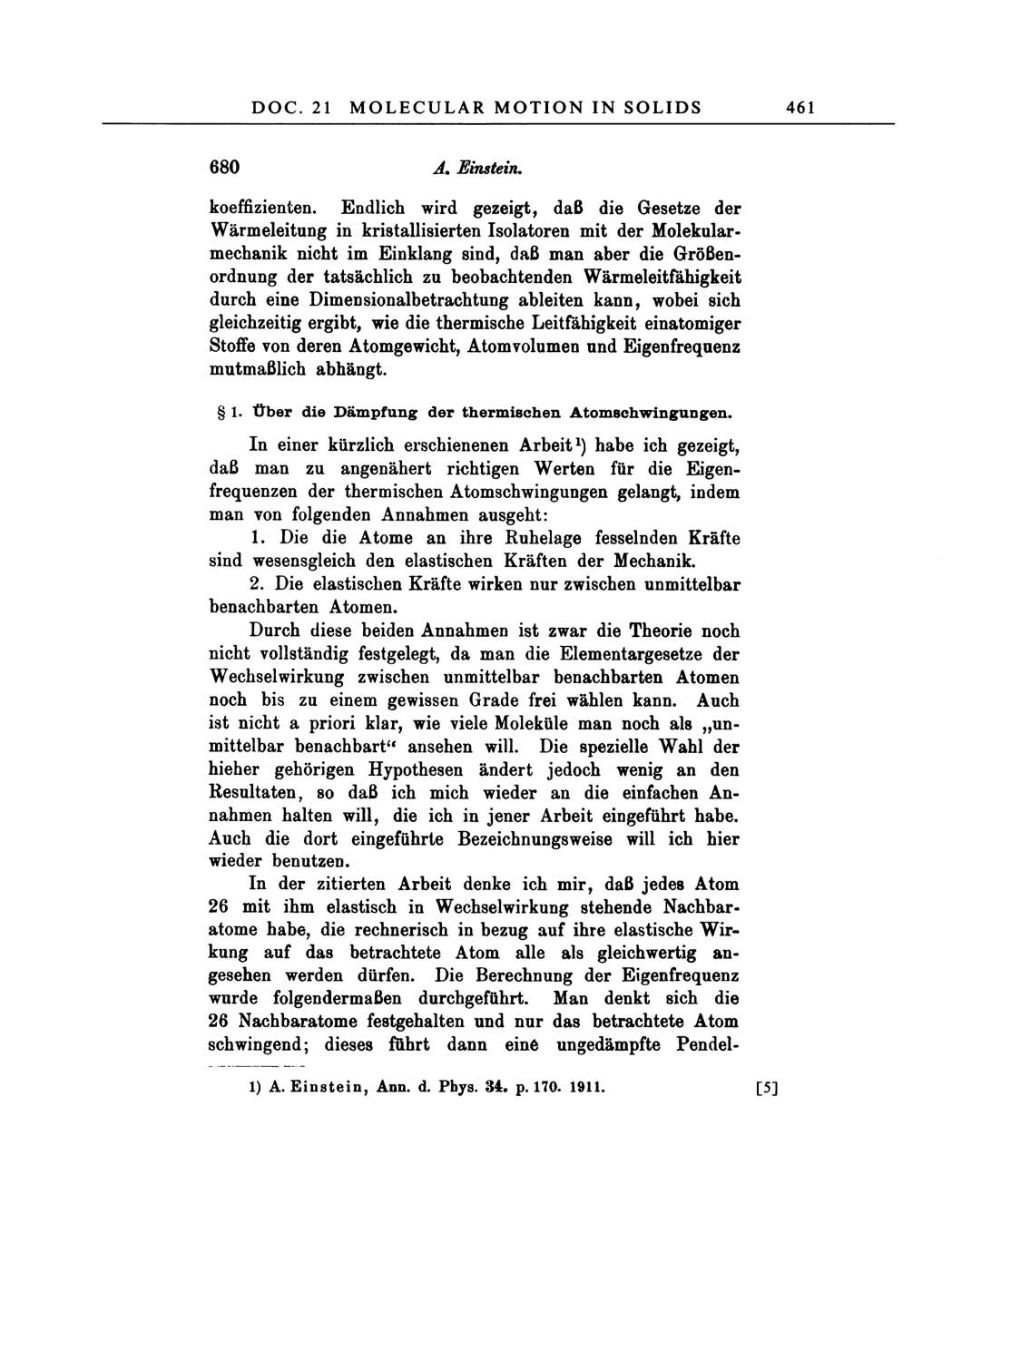 Volume 3: The Swiss Years: Writings 1909-1911 page 461